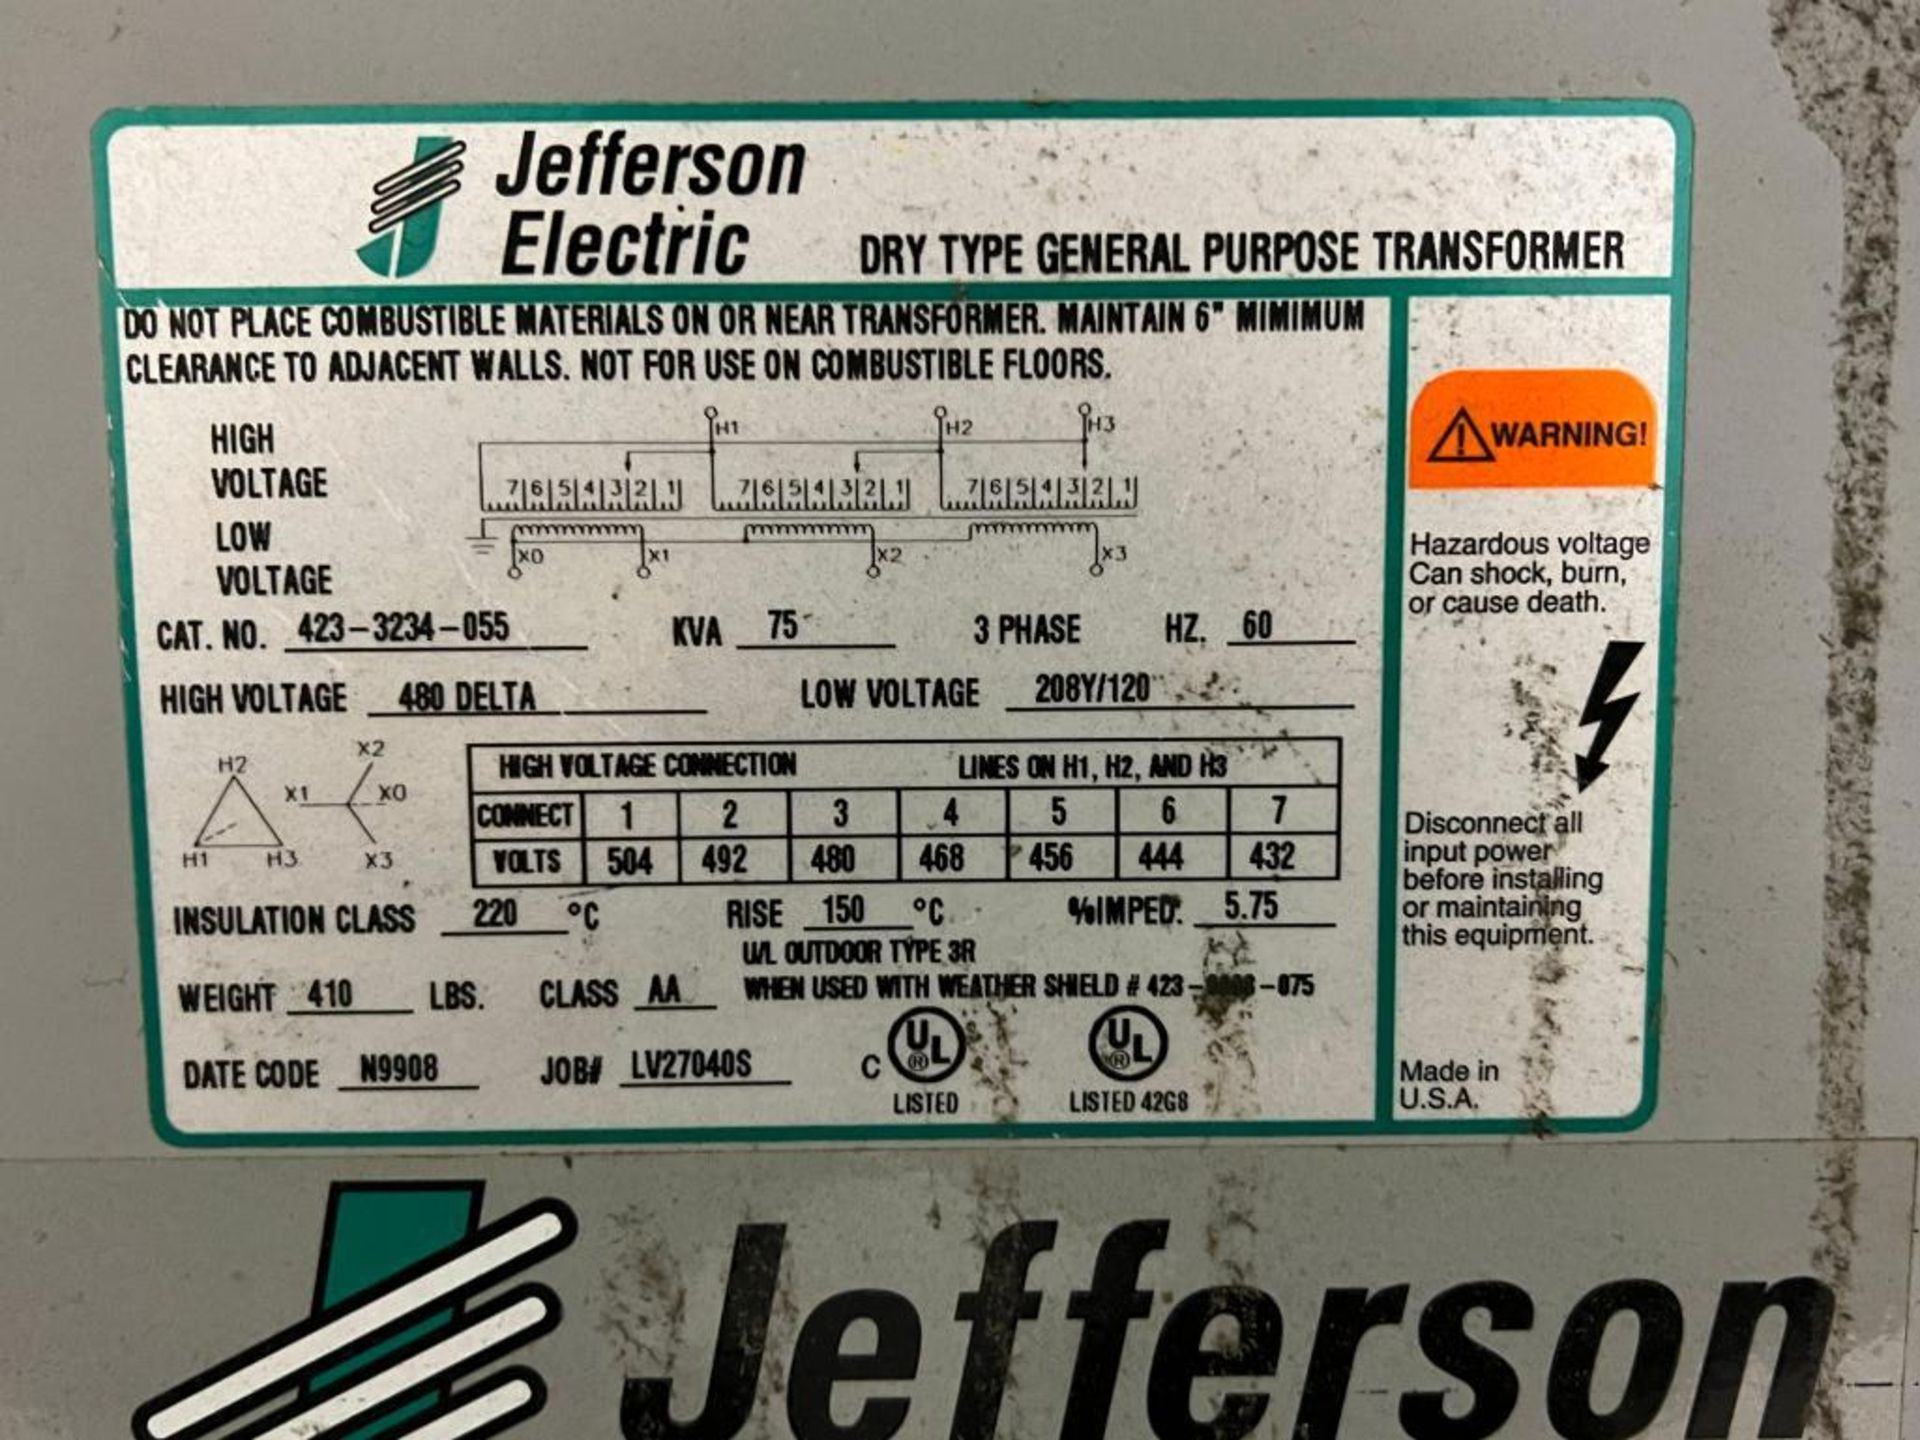 Jefferson Electric, Model 423-3234-055 Class AA Dry Type General Purpose Transformer - Image 3 of 3